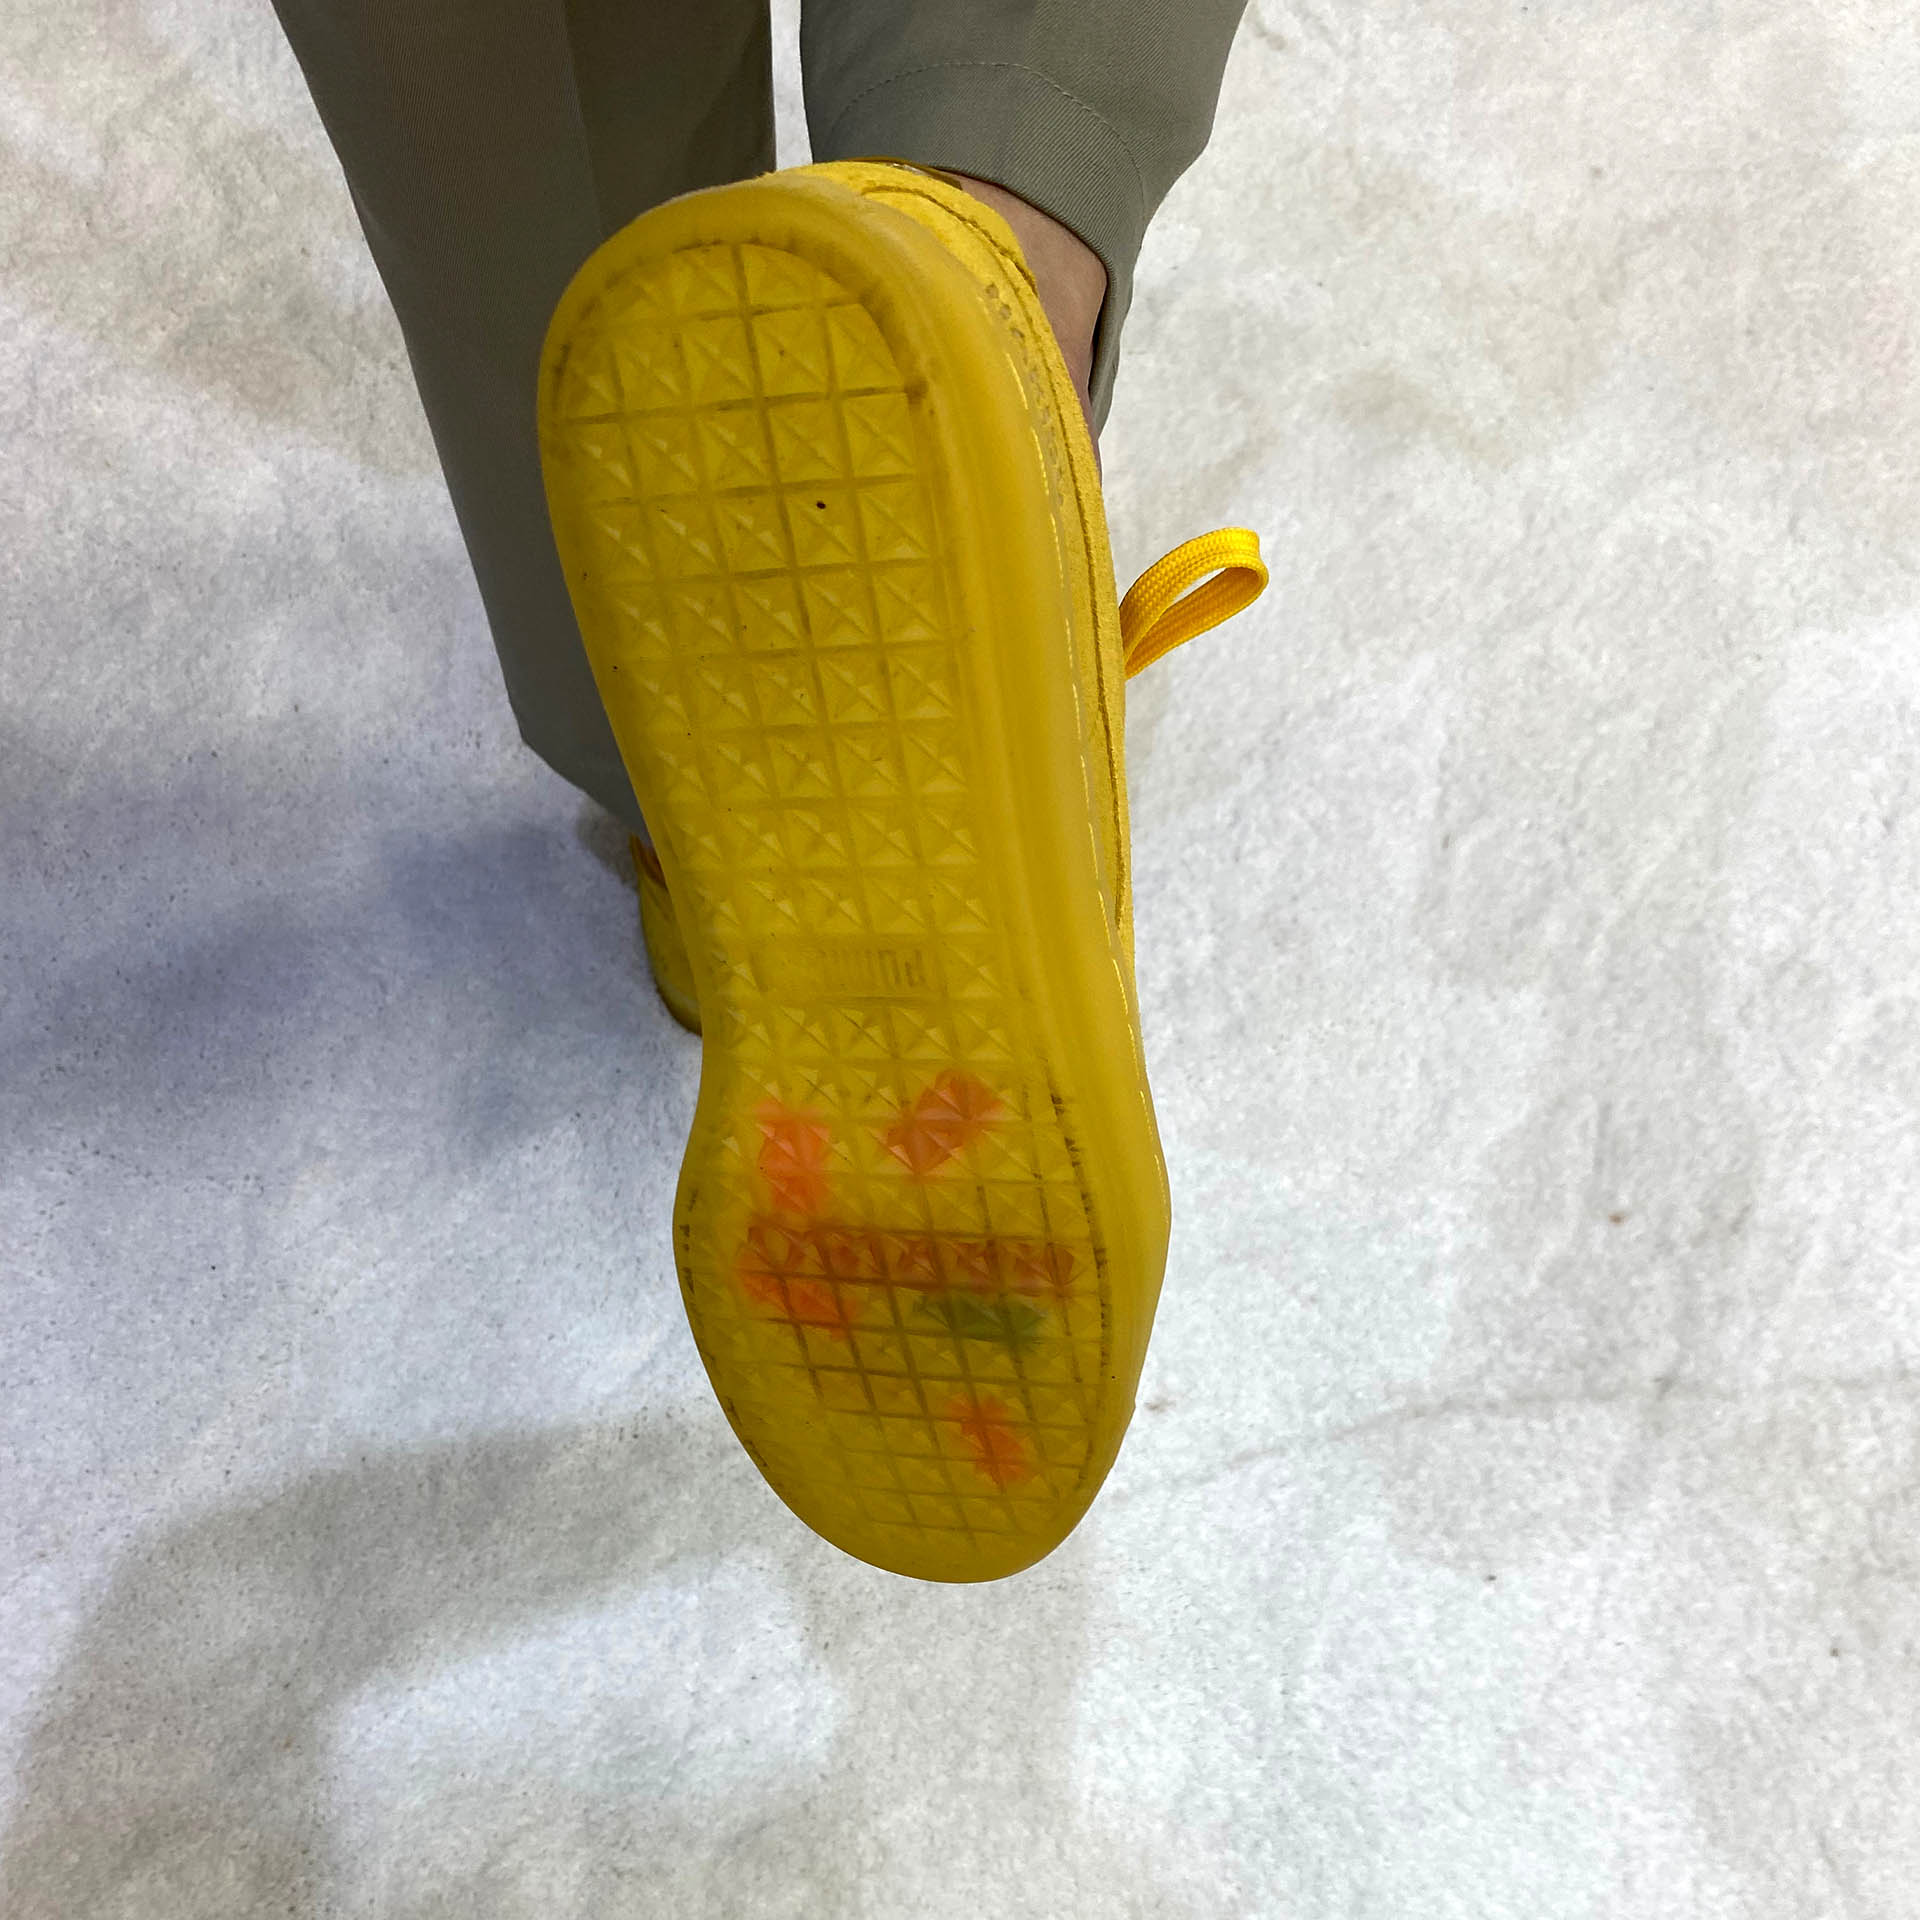 sole of Haribo sneakers, which appear to have gummy bears crushed into them